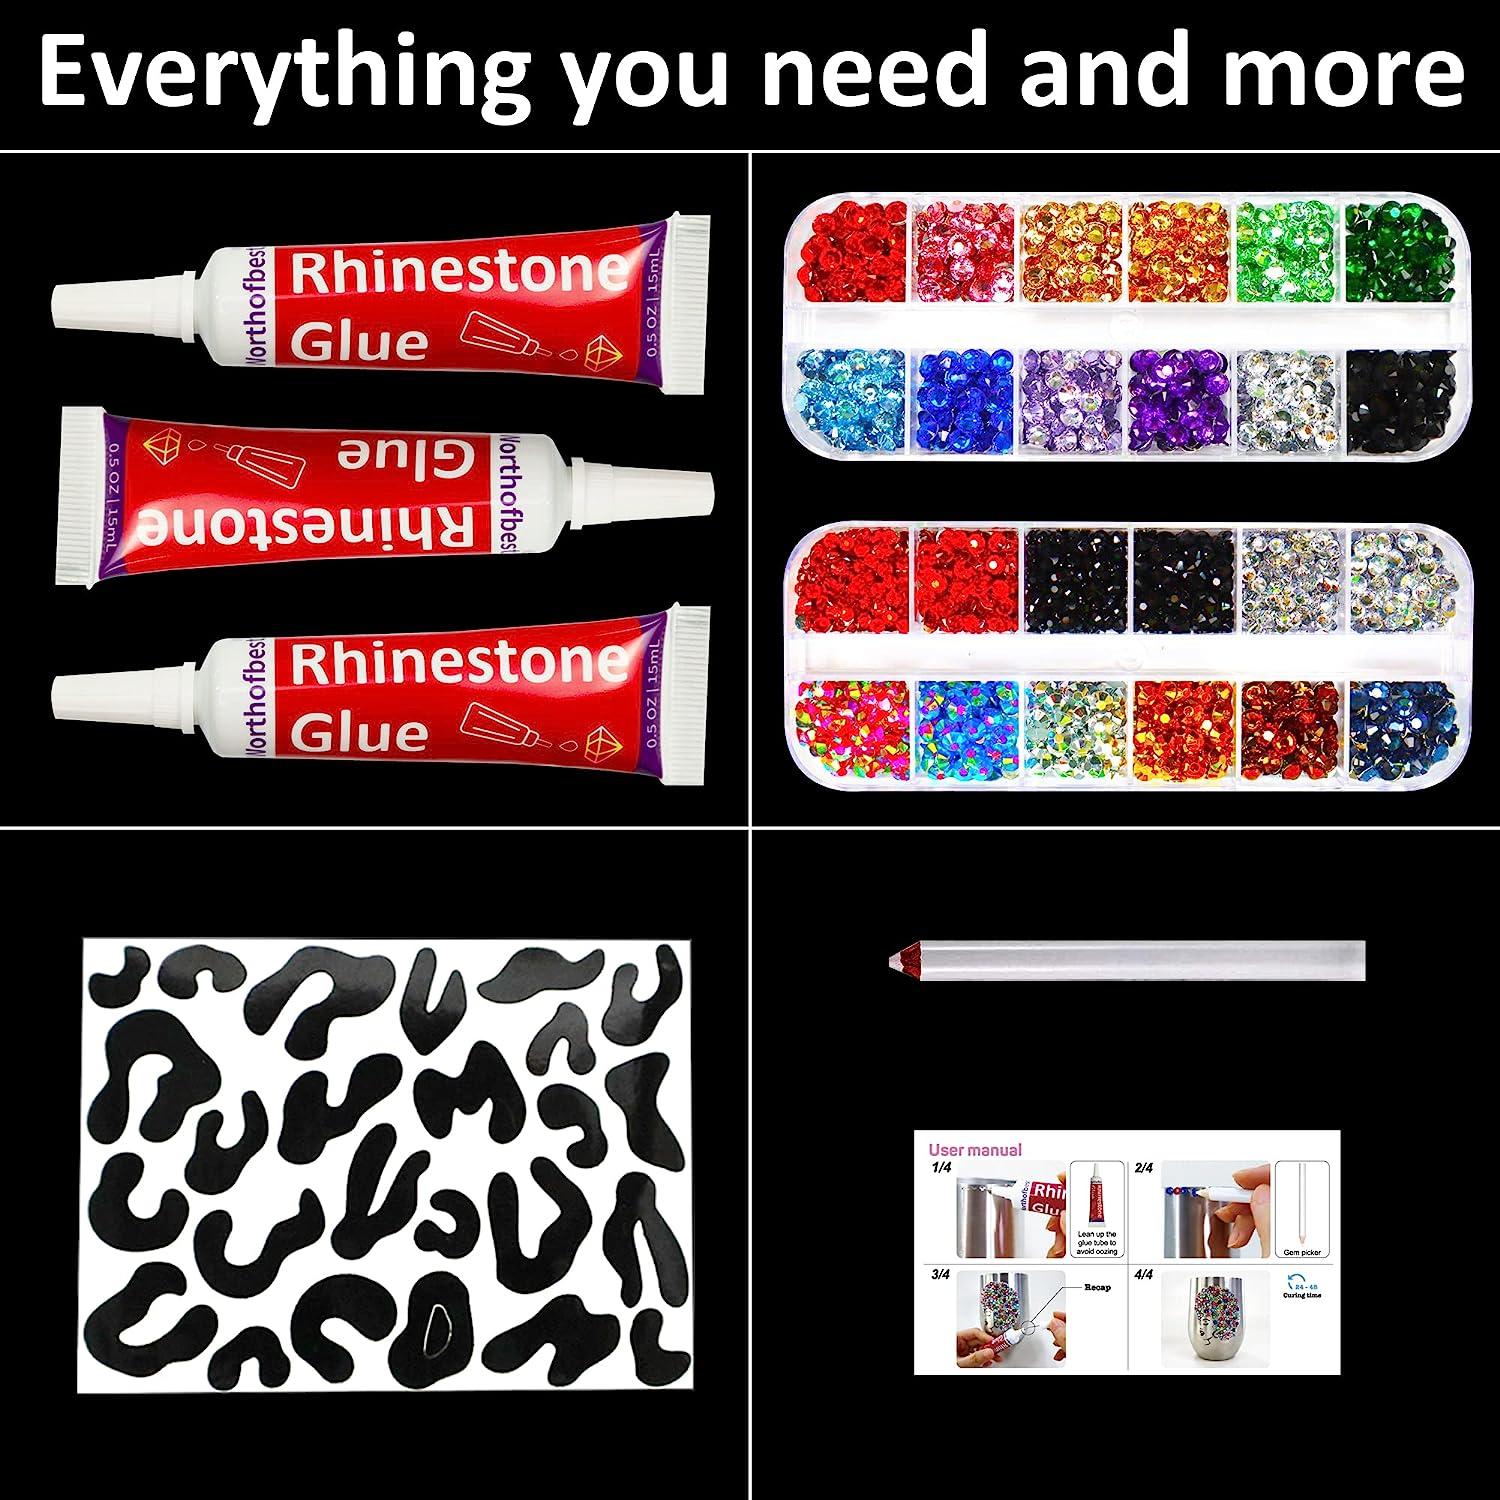 worthofbest Rhinestones For Crafts With Glue Clear, Bedazzler Kit With  Rhinestones Flatback Crystal Gems Bling All-Purpose Adhesive, Rinesto